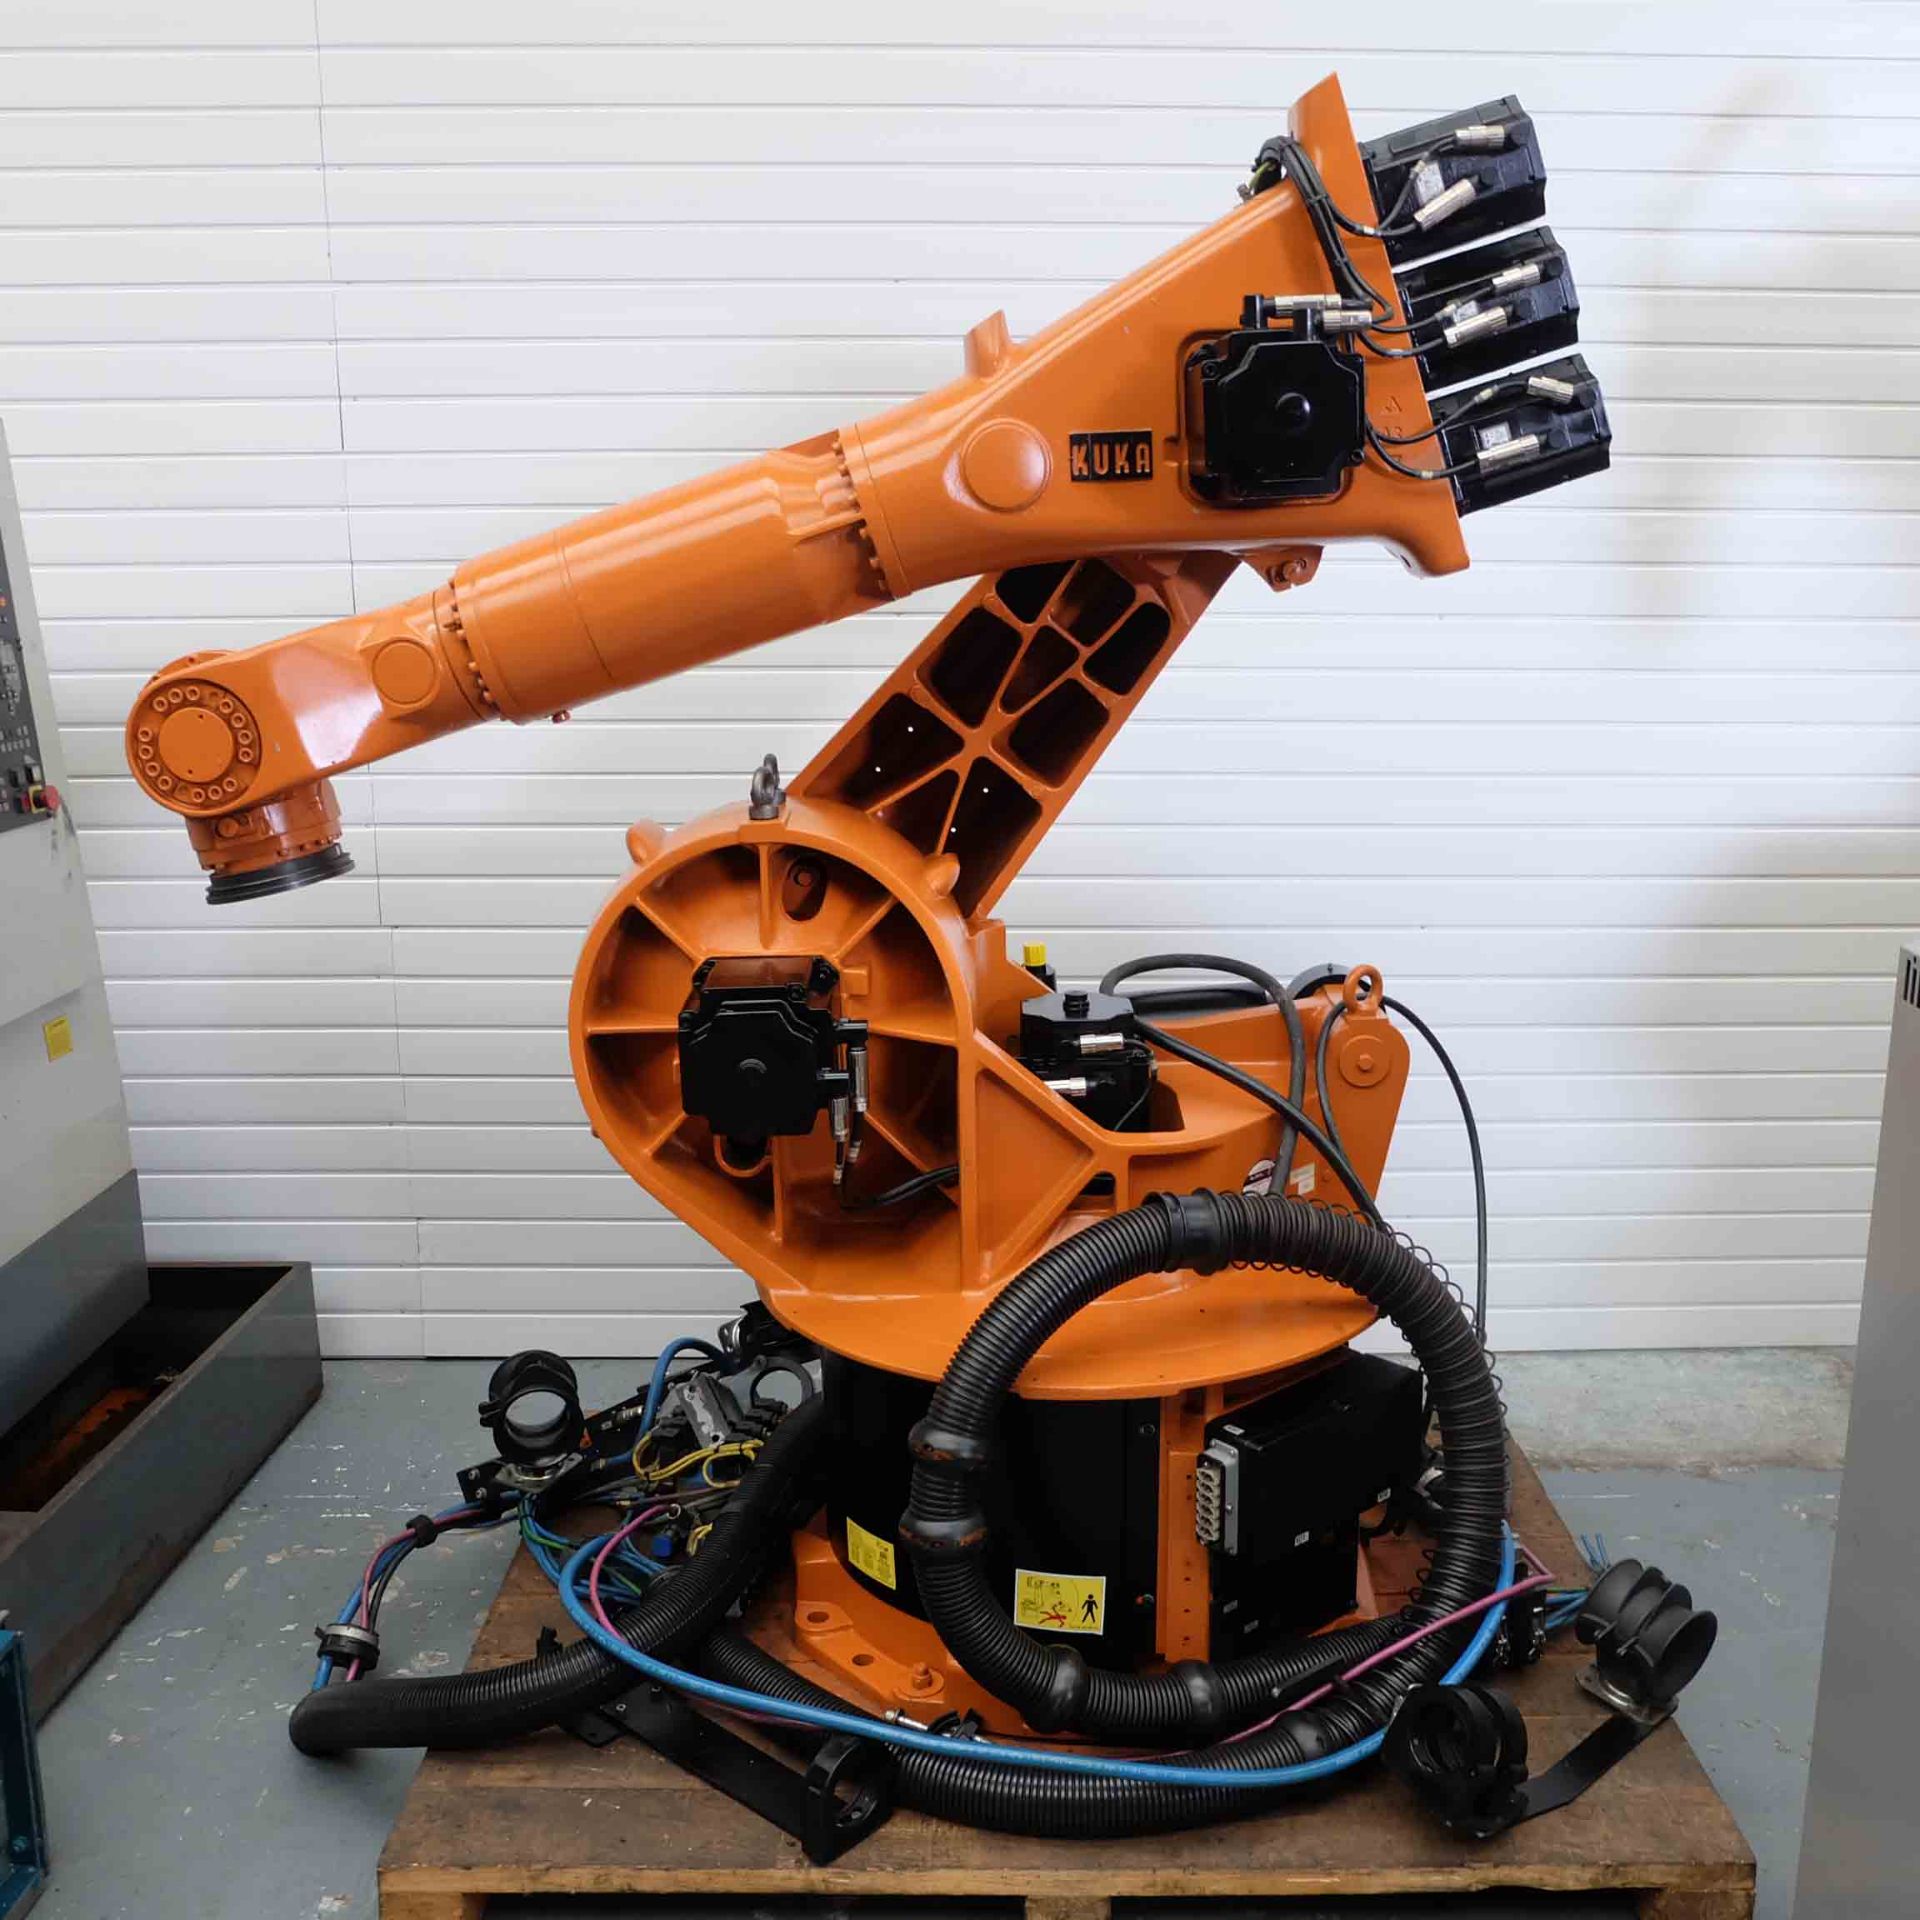 2 x Kuka Type KR125 6 Axis Robotic Arms. (1 Complete & 1 Incomplete). - Image 12 of 35